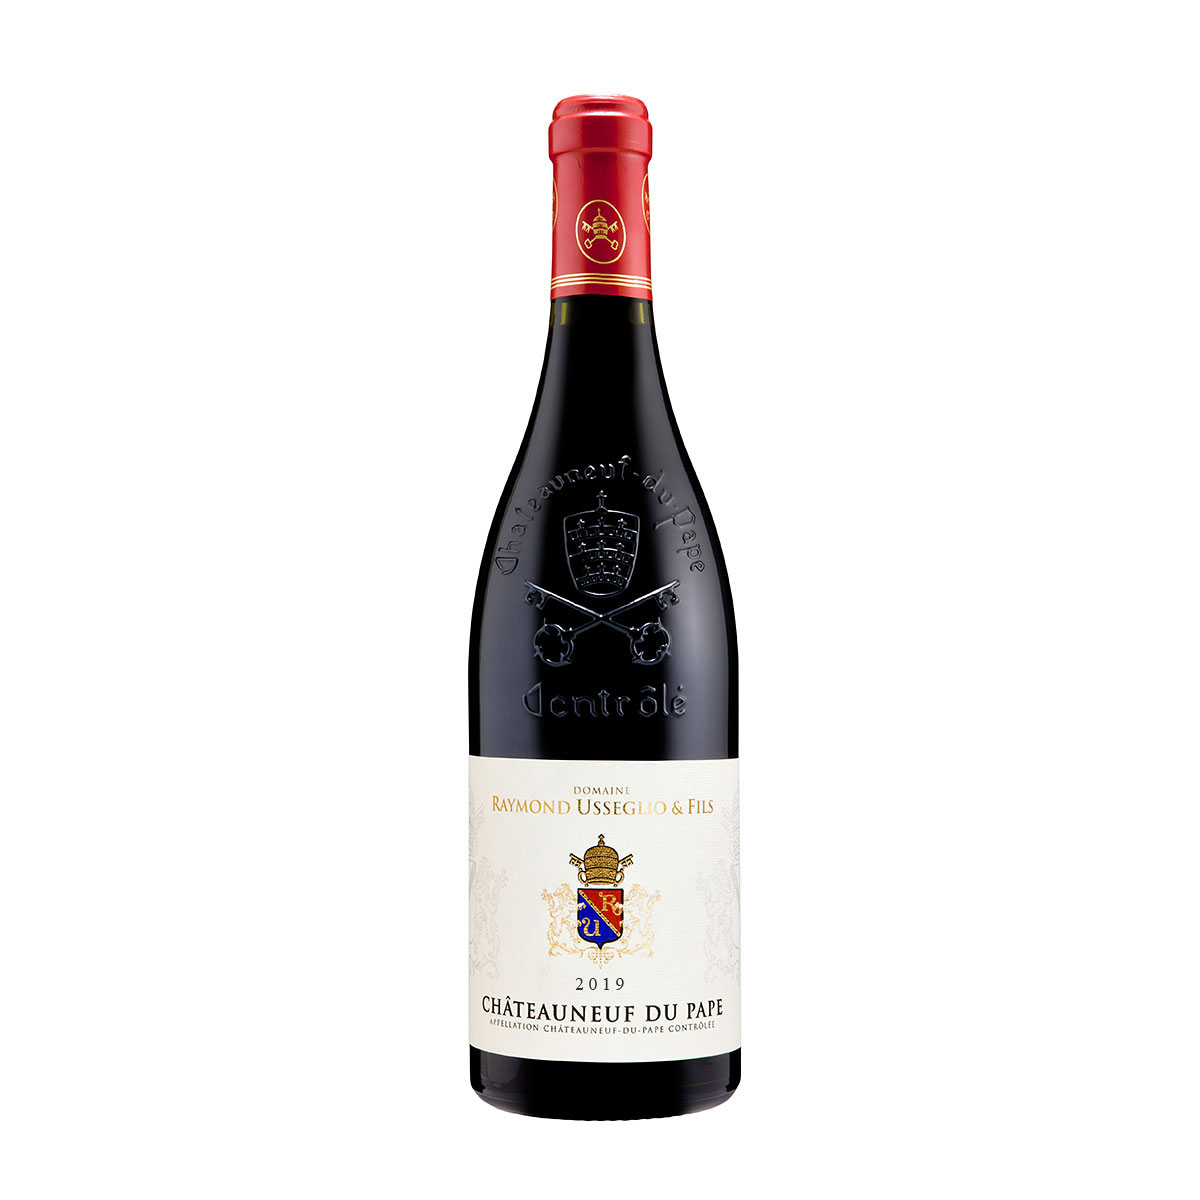 Usseglio Chateauneuf Du Pape 19 75 Cl Delivery In Czech Republic By Giftsforeurope